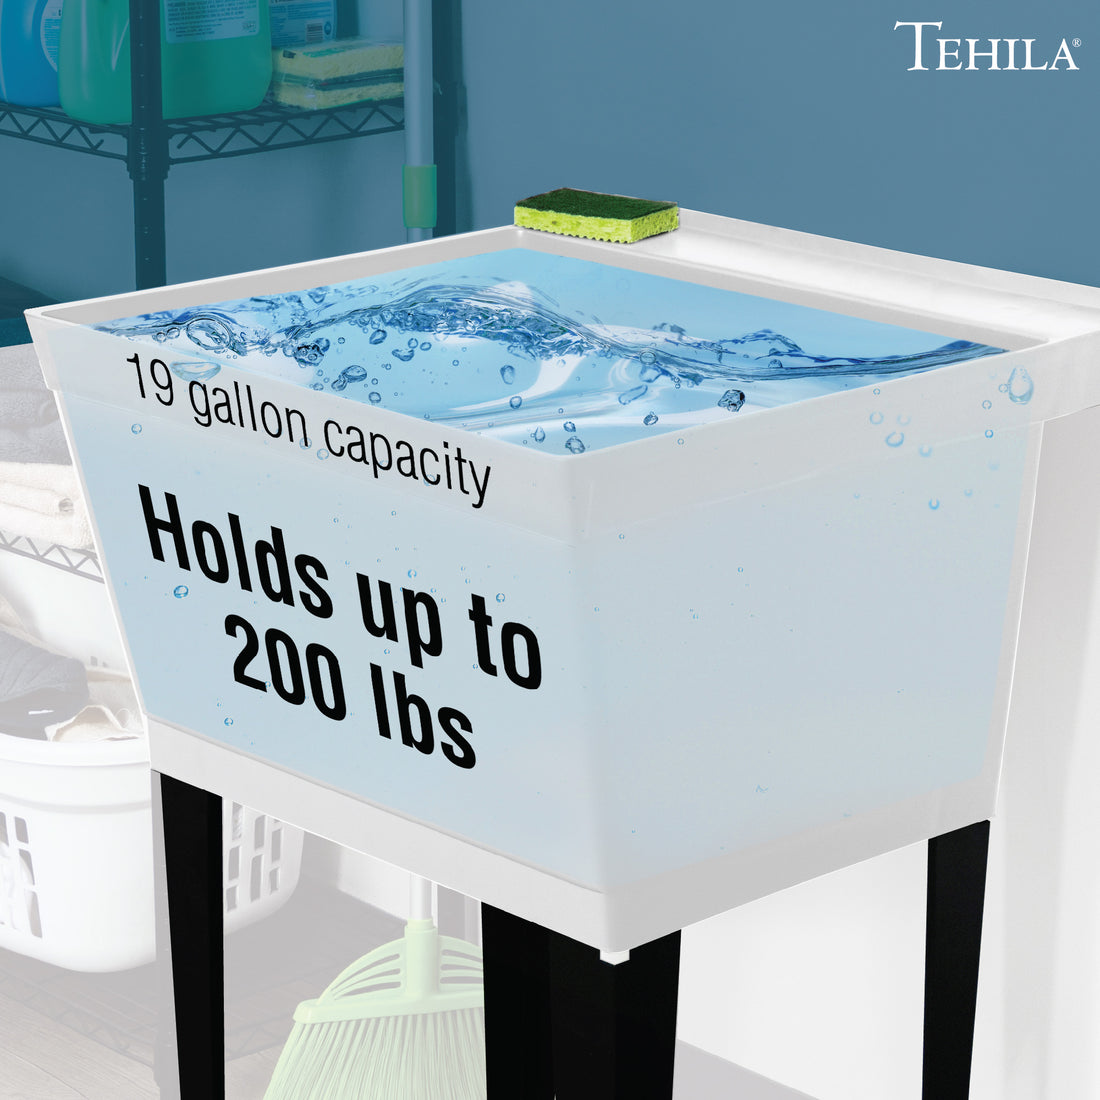 Utility Sink can hold up to 200 lbs or 19 gallons